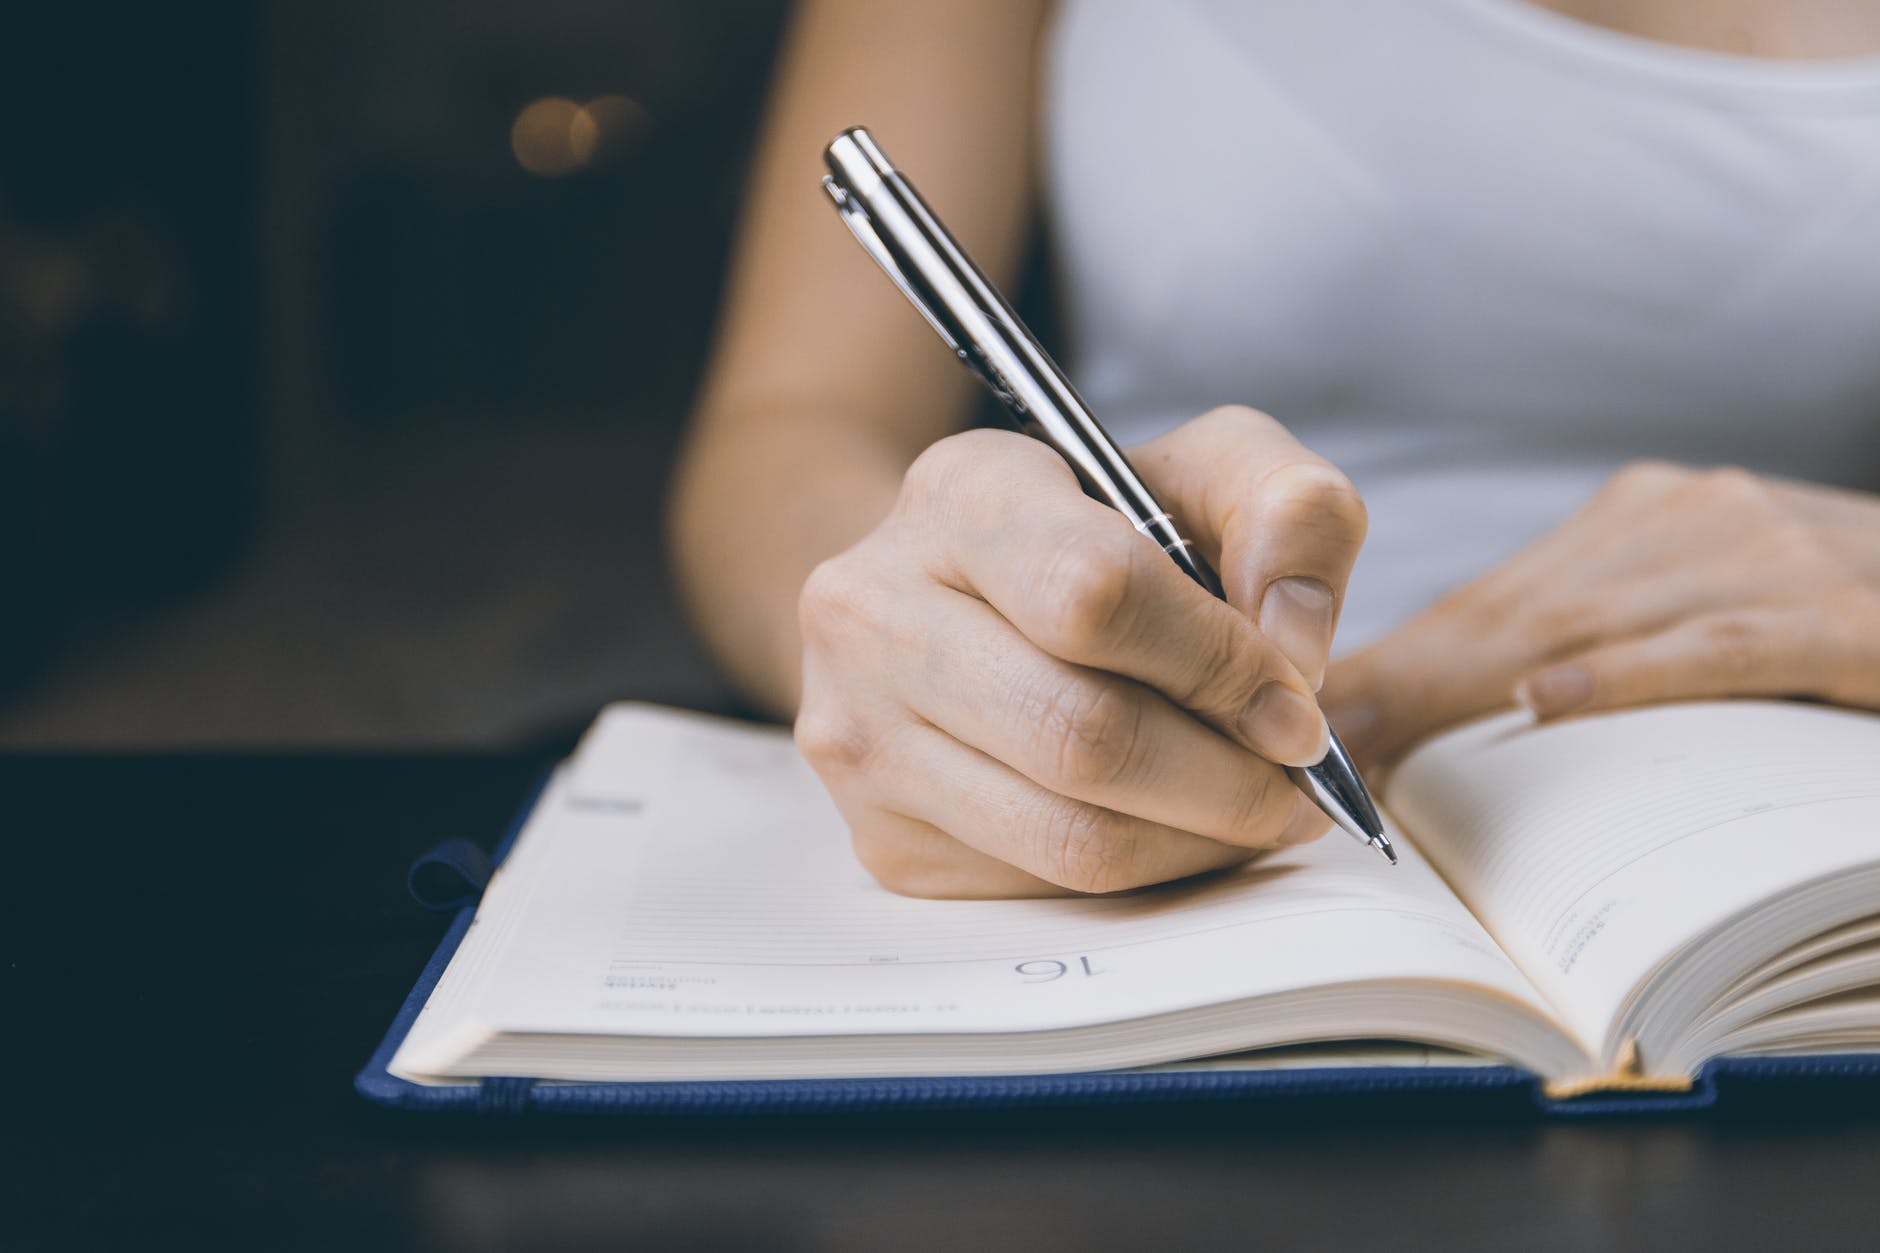 Stock image of woman writing in notebook